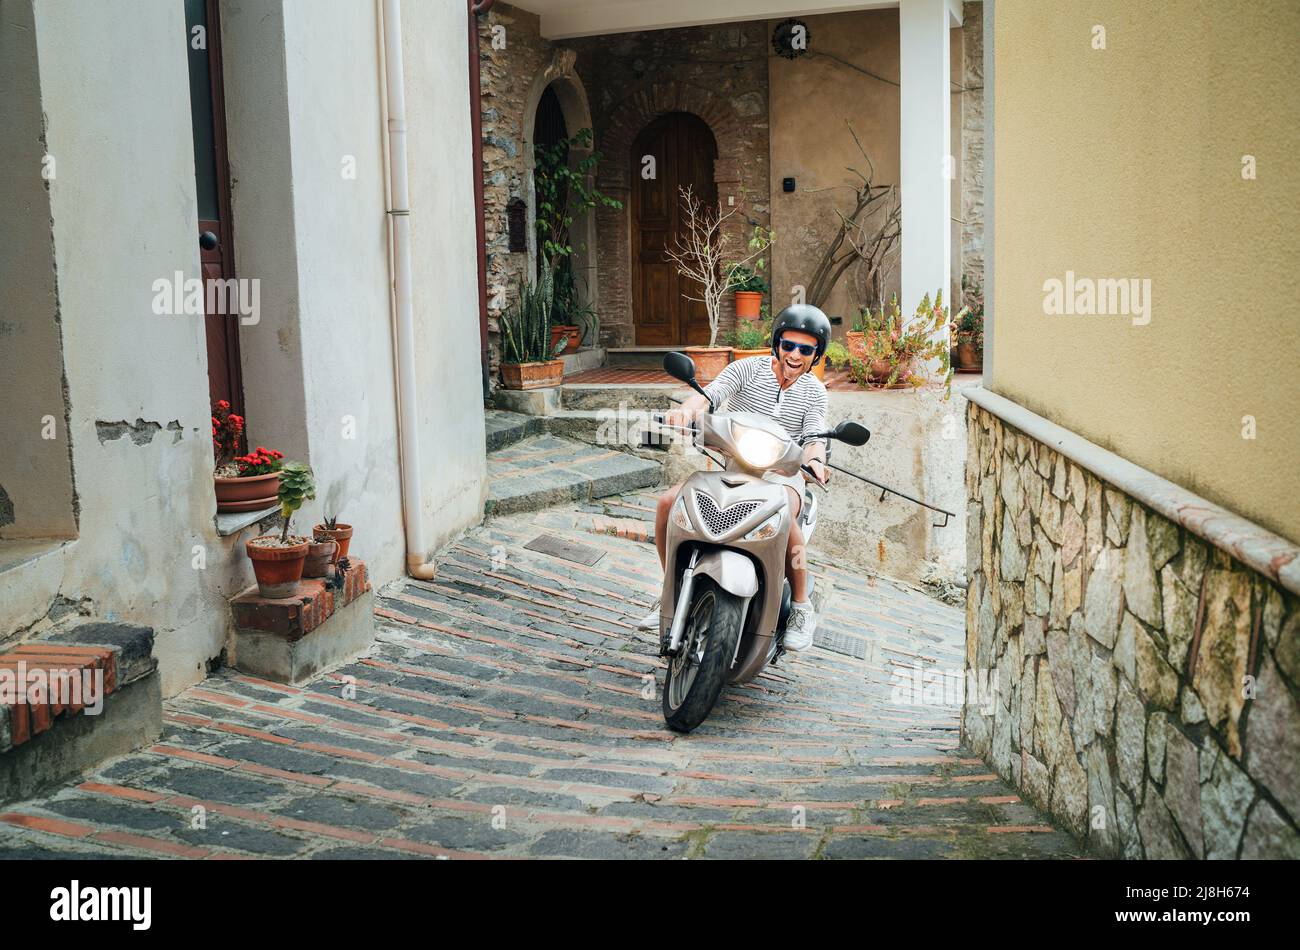 Cheerfully smiling man in helmet and sunglasses riding the motor scooter on the narrow Sicilian old town streets. Happy Italian vacation and transport Stock Photo